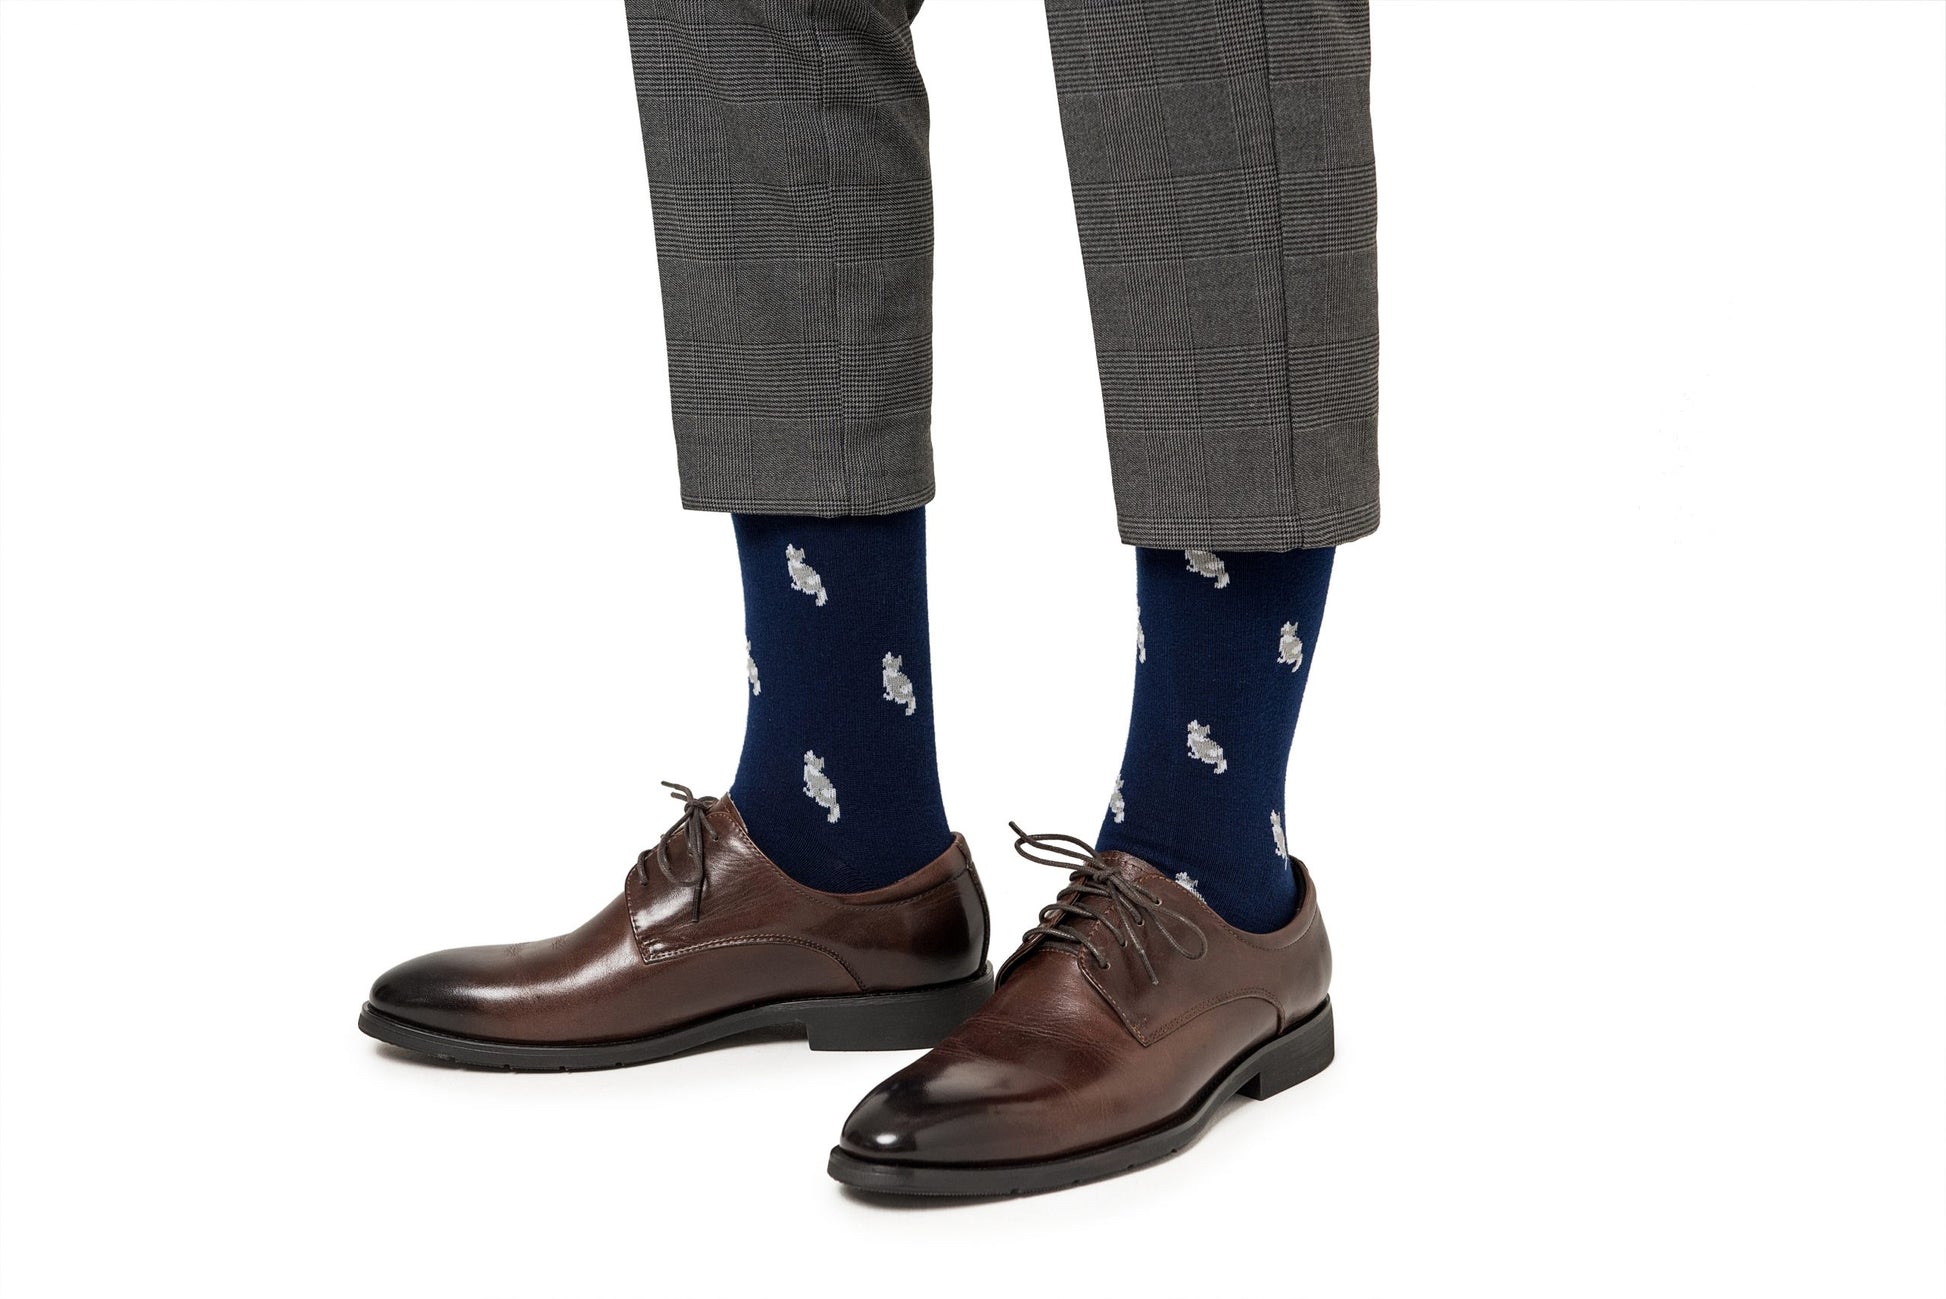 A pair of legs wearing brown shoes and Cat Socks.